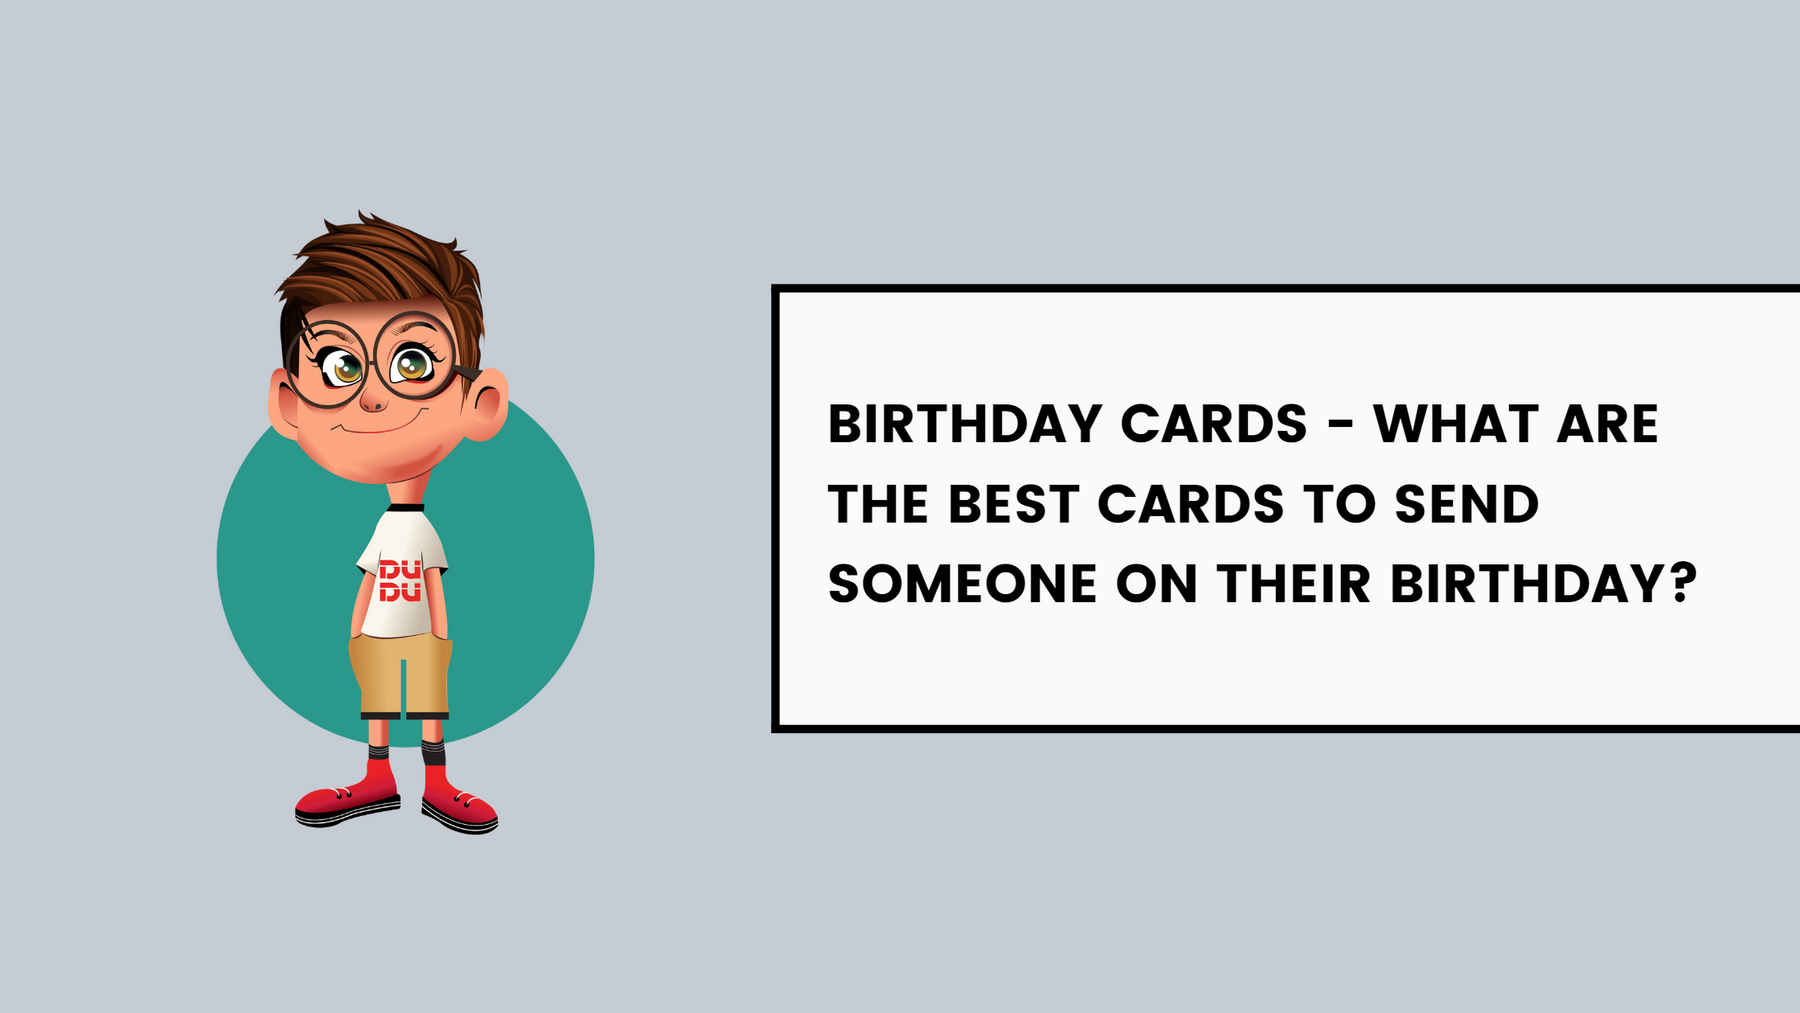 Birthday Cards - What are the best cards to send someone on their birthday?